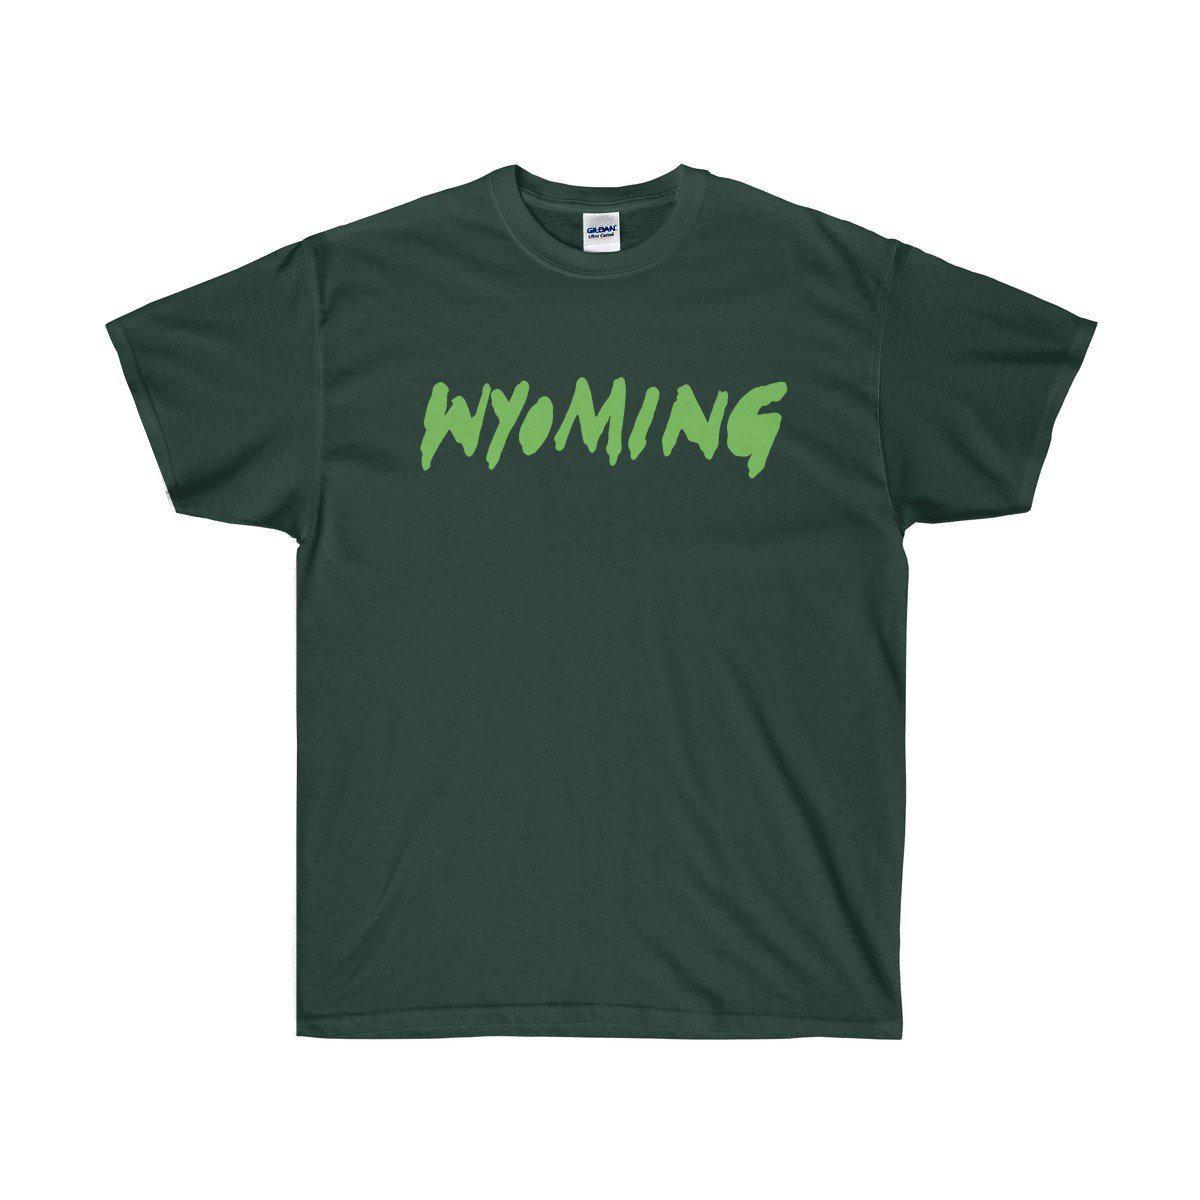 Wyoming Kanye West Ye 2018 Album Cover Tee-Forest Green-S-Archethype